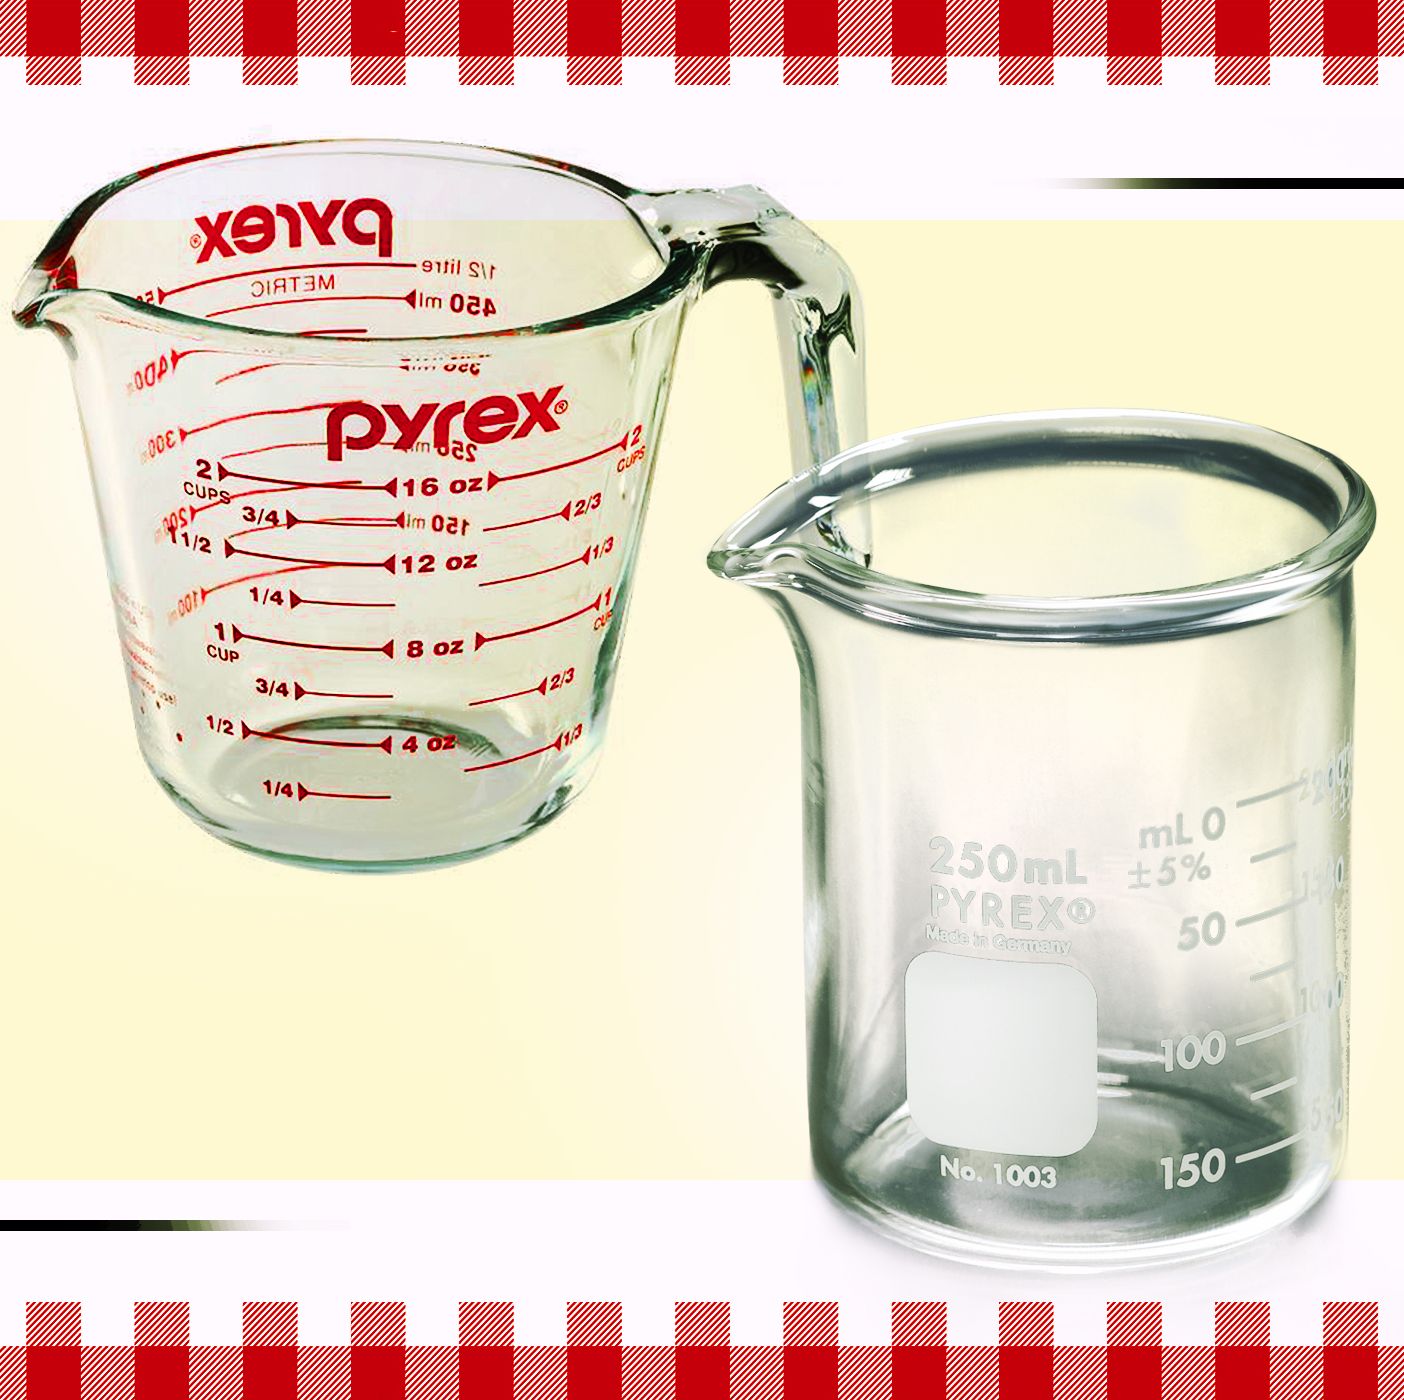 Worried About Your Pyrex Exploding? Here's Why American Pyrex Is More Likely to Shatter